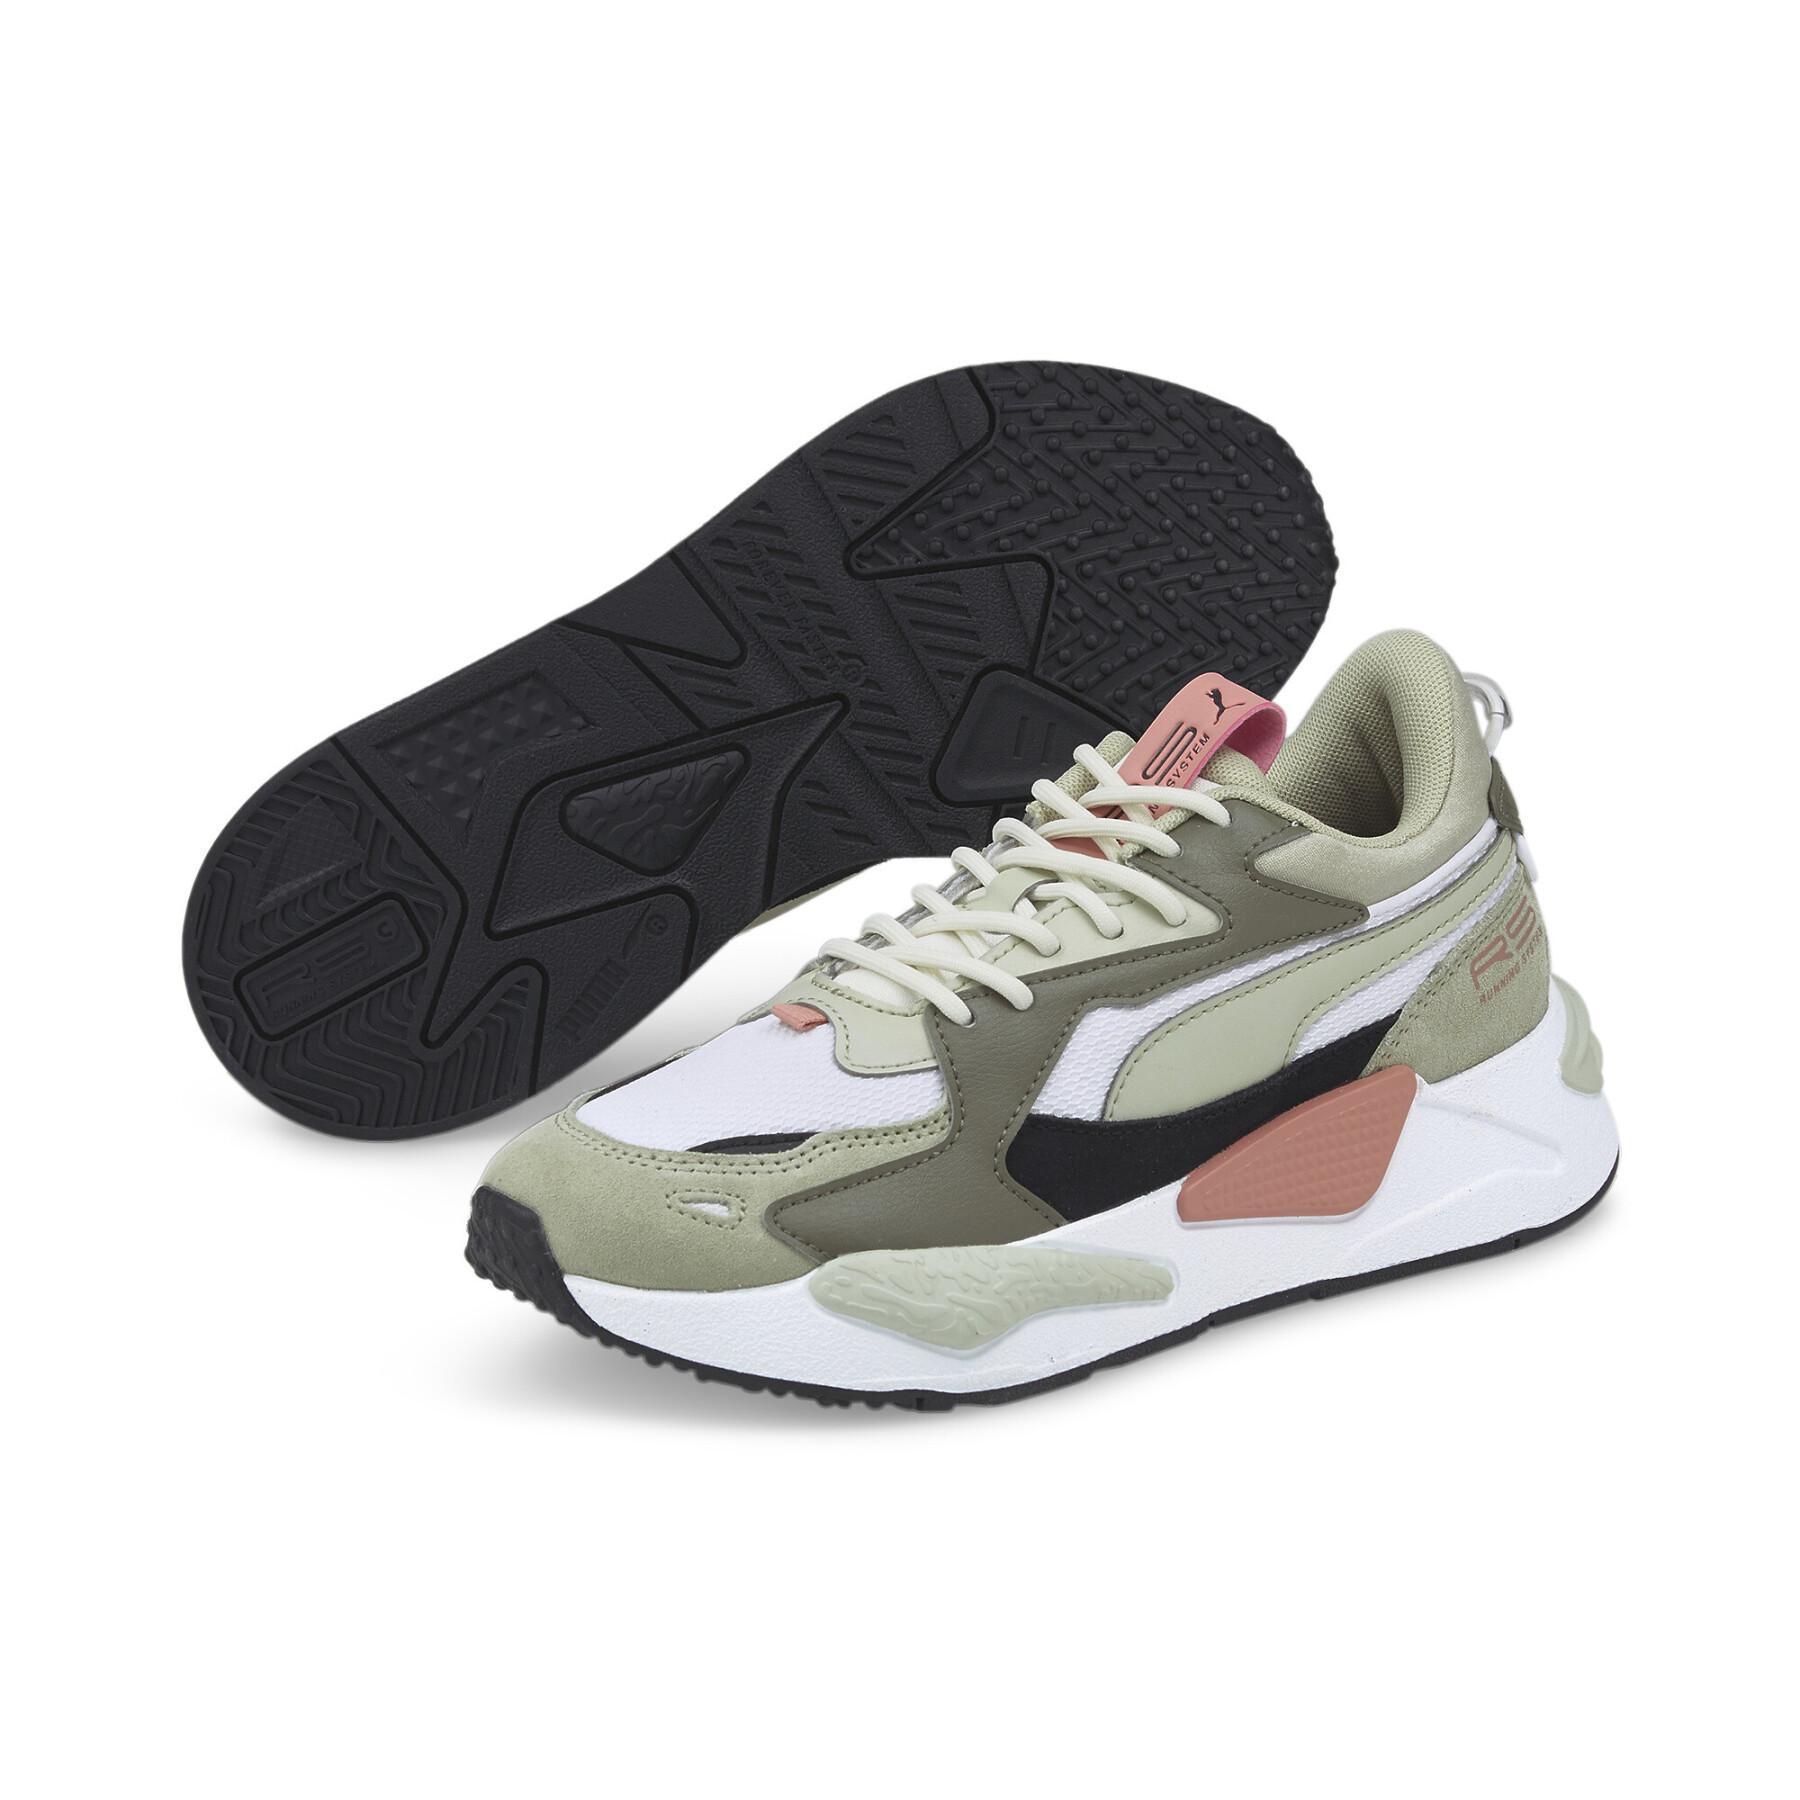 Women's sneakers Puma RS-Z Reinvent